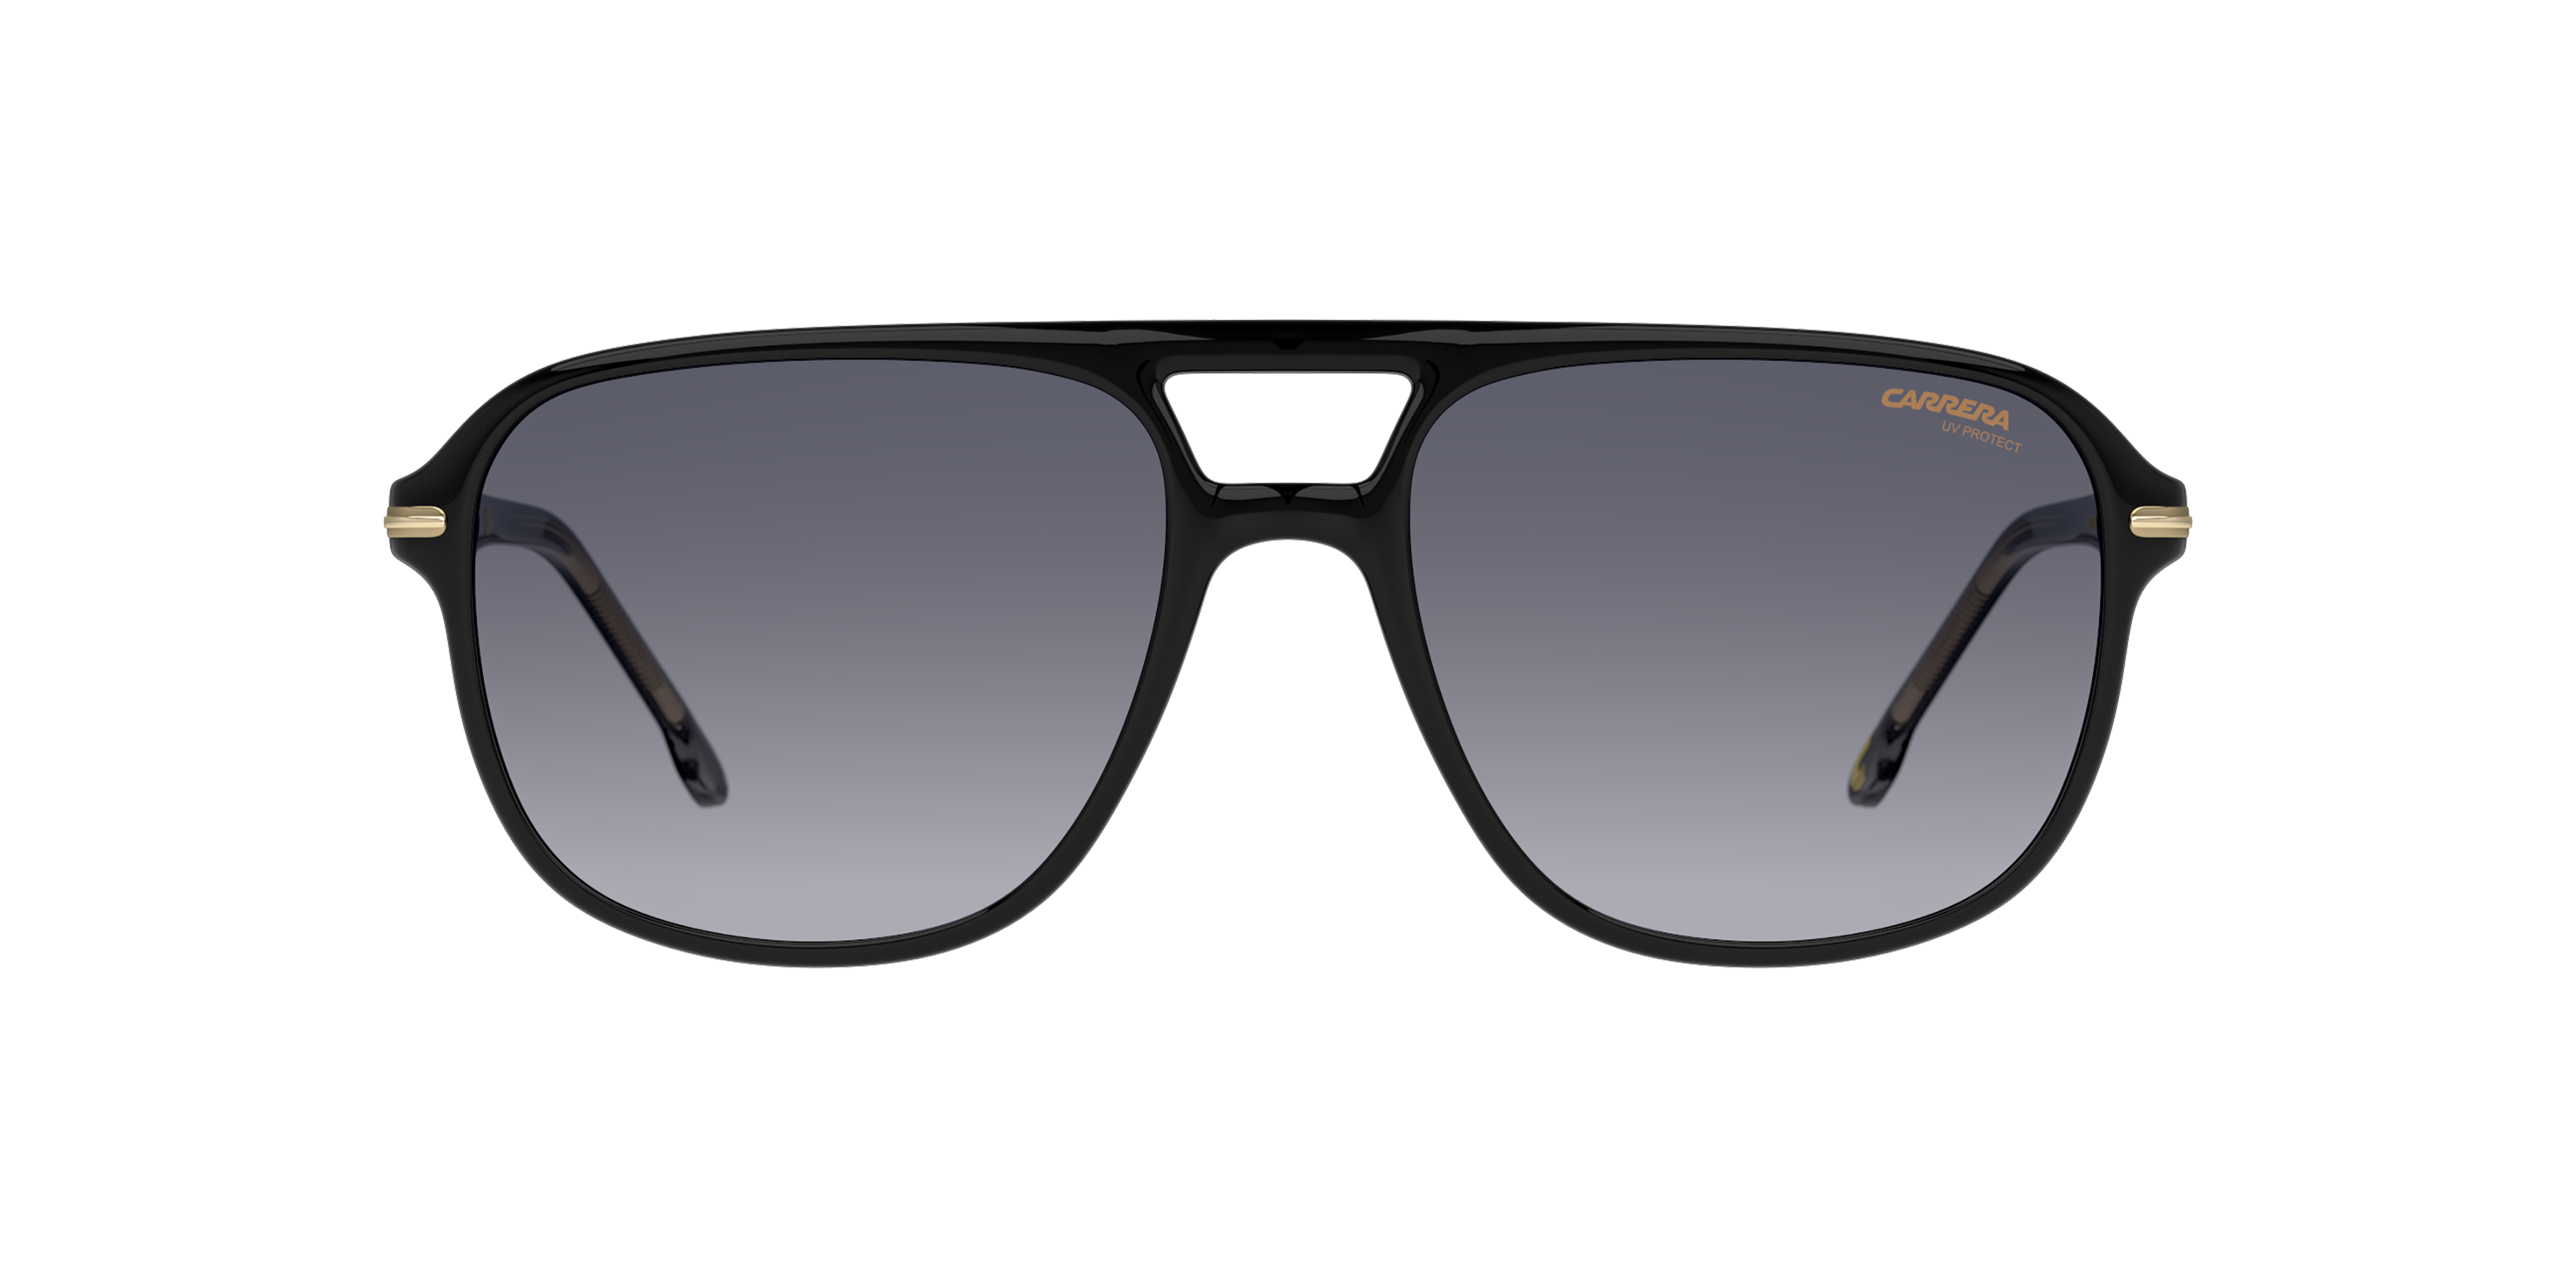 [products.image.front] CARRERA CARRERA 279/S 2M2/9O